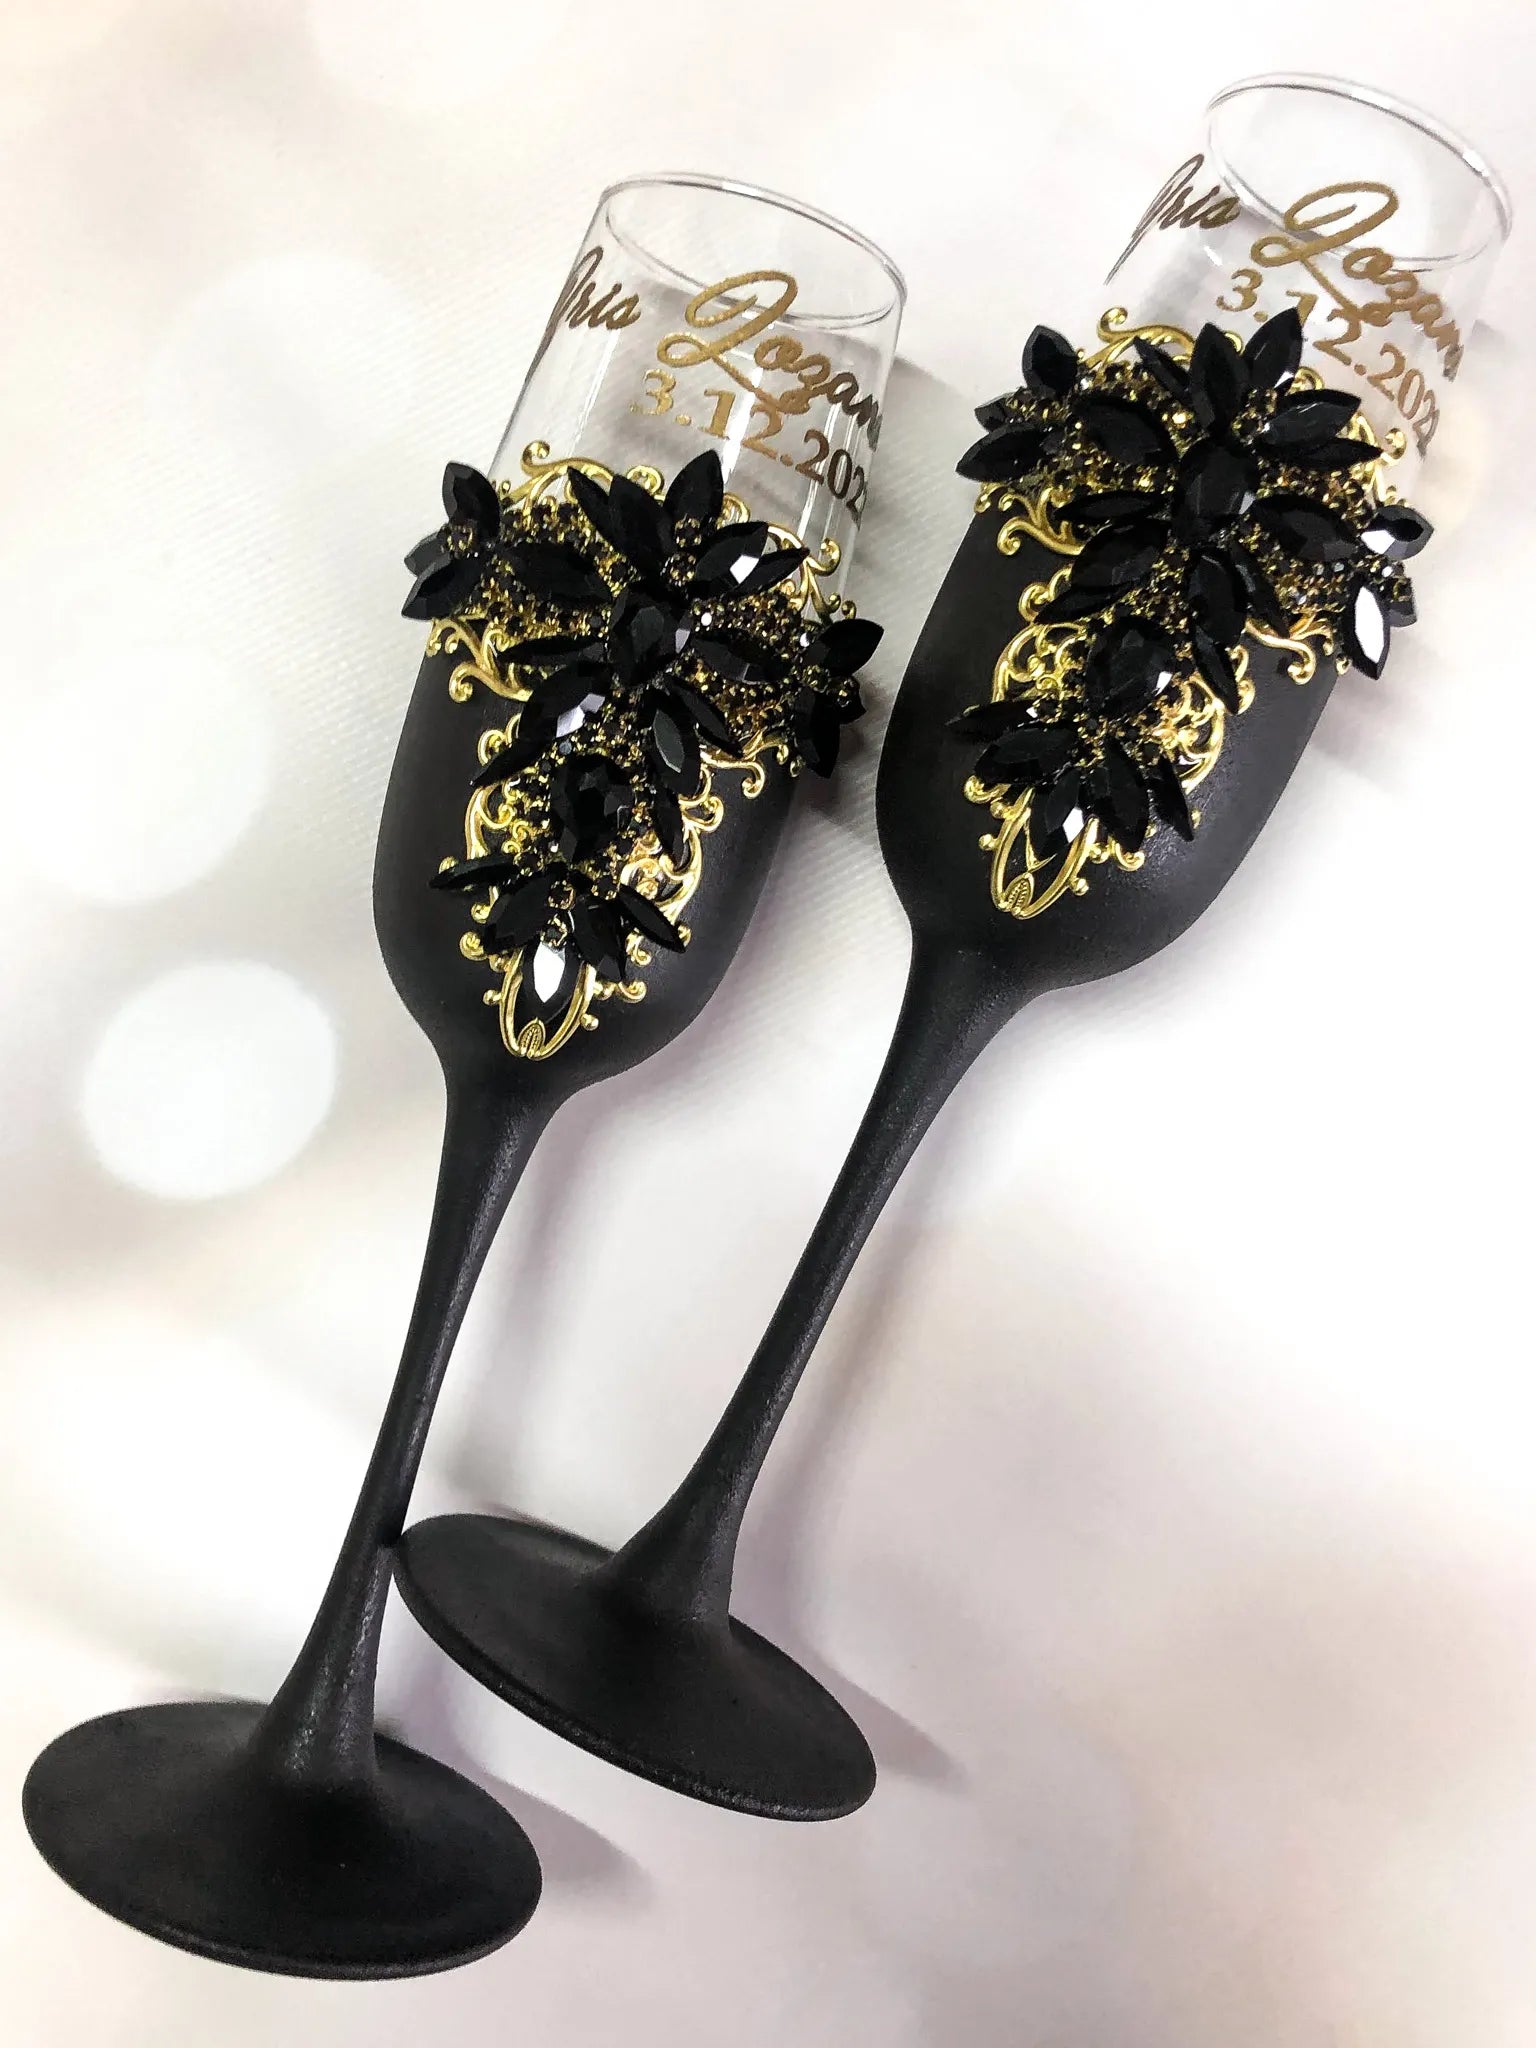 Gothic black and gold engraved champagne flutes